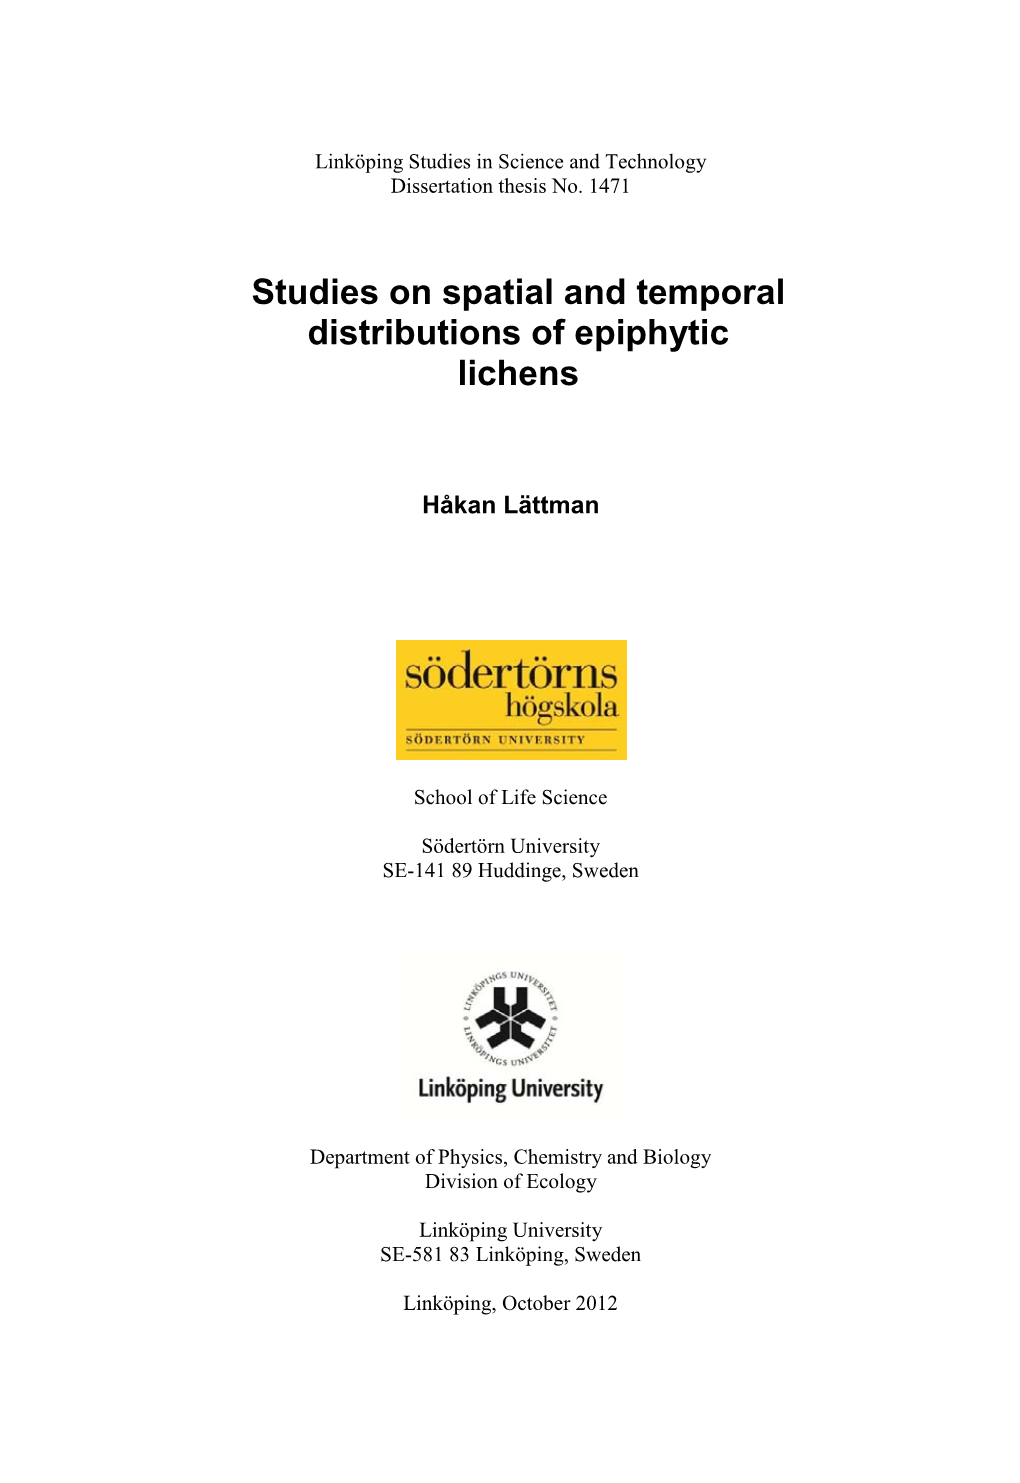 Studies on Spatial and Temporal Distributions of Epiphytic Lichens